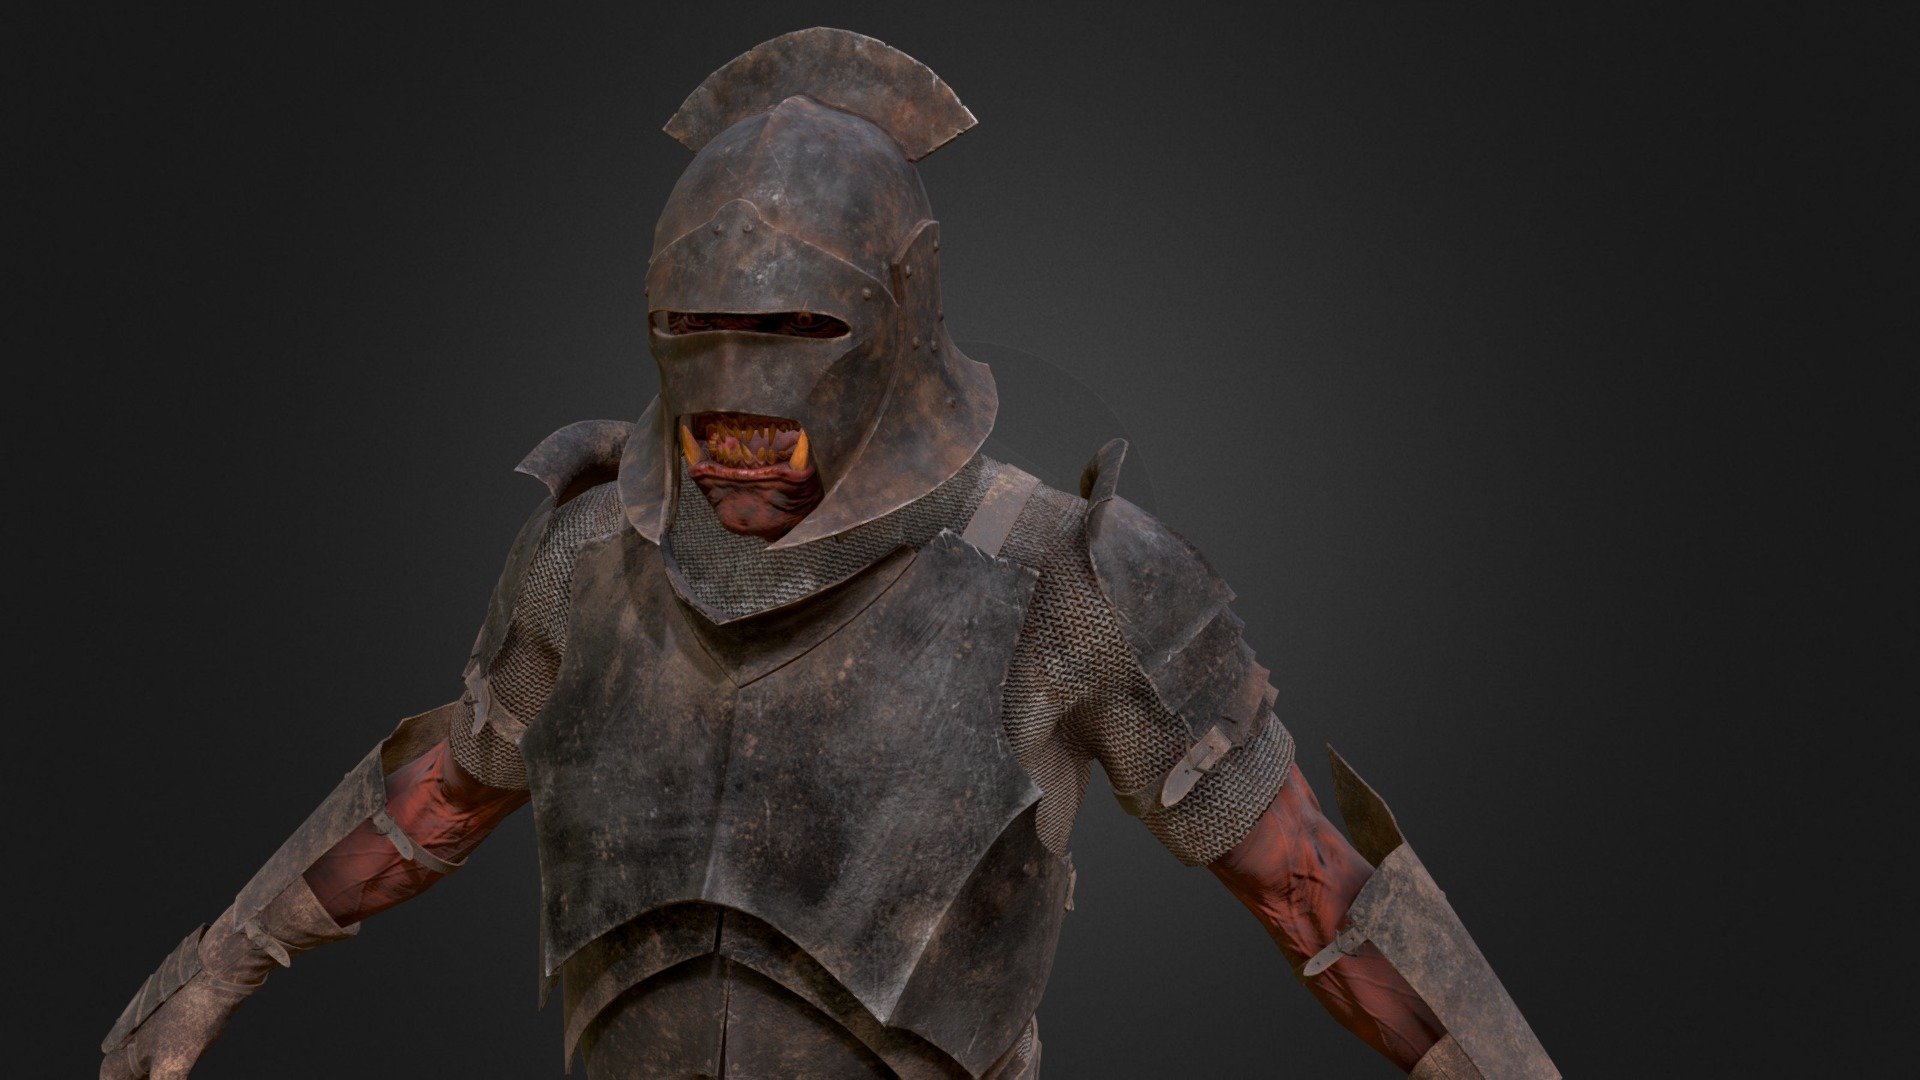 There is the Uruk pack from the J.R.R Tolkien universe ! 

This character is game ready, made for Unreal Engine 3d model